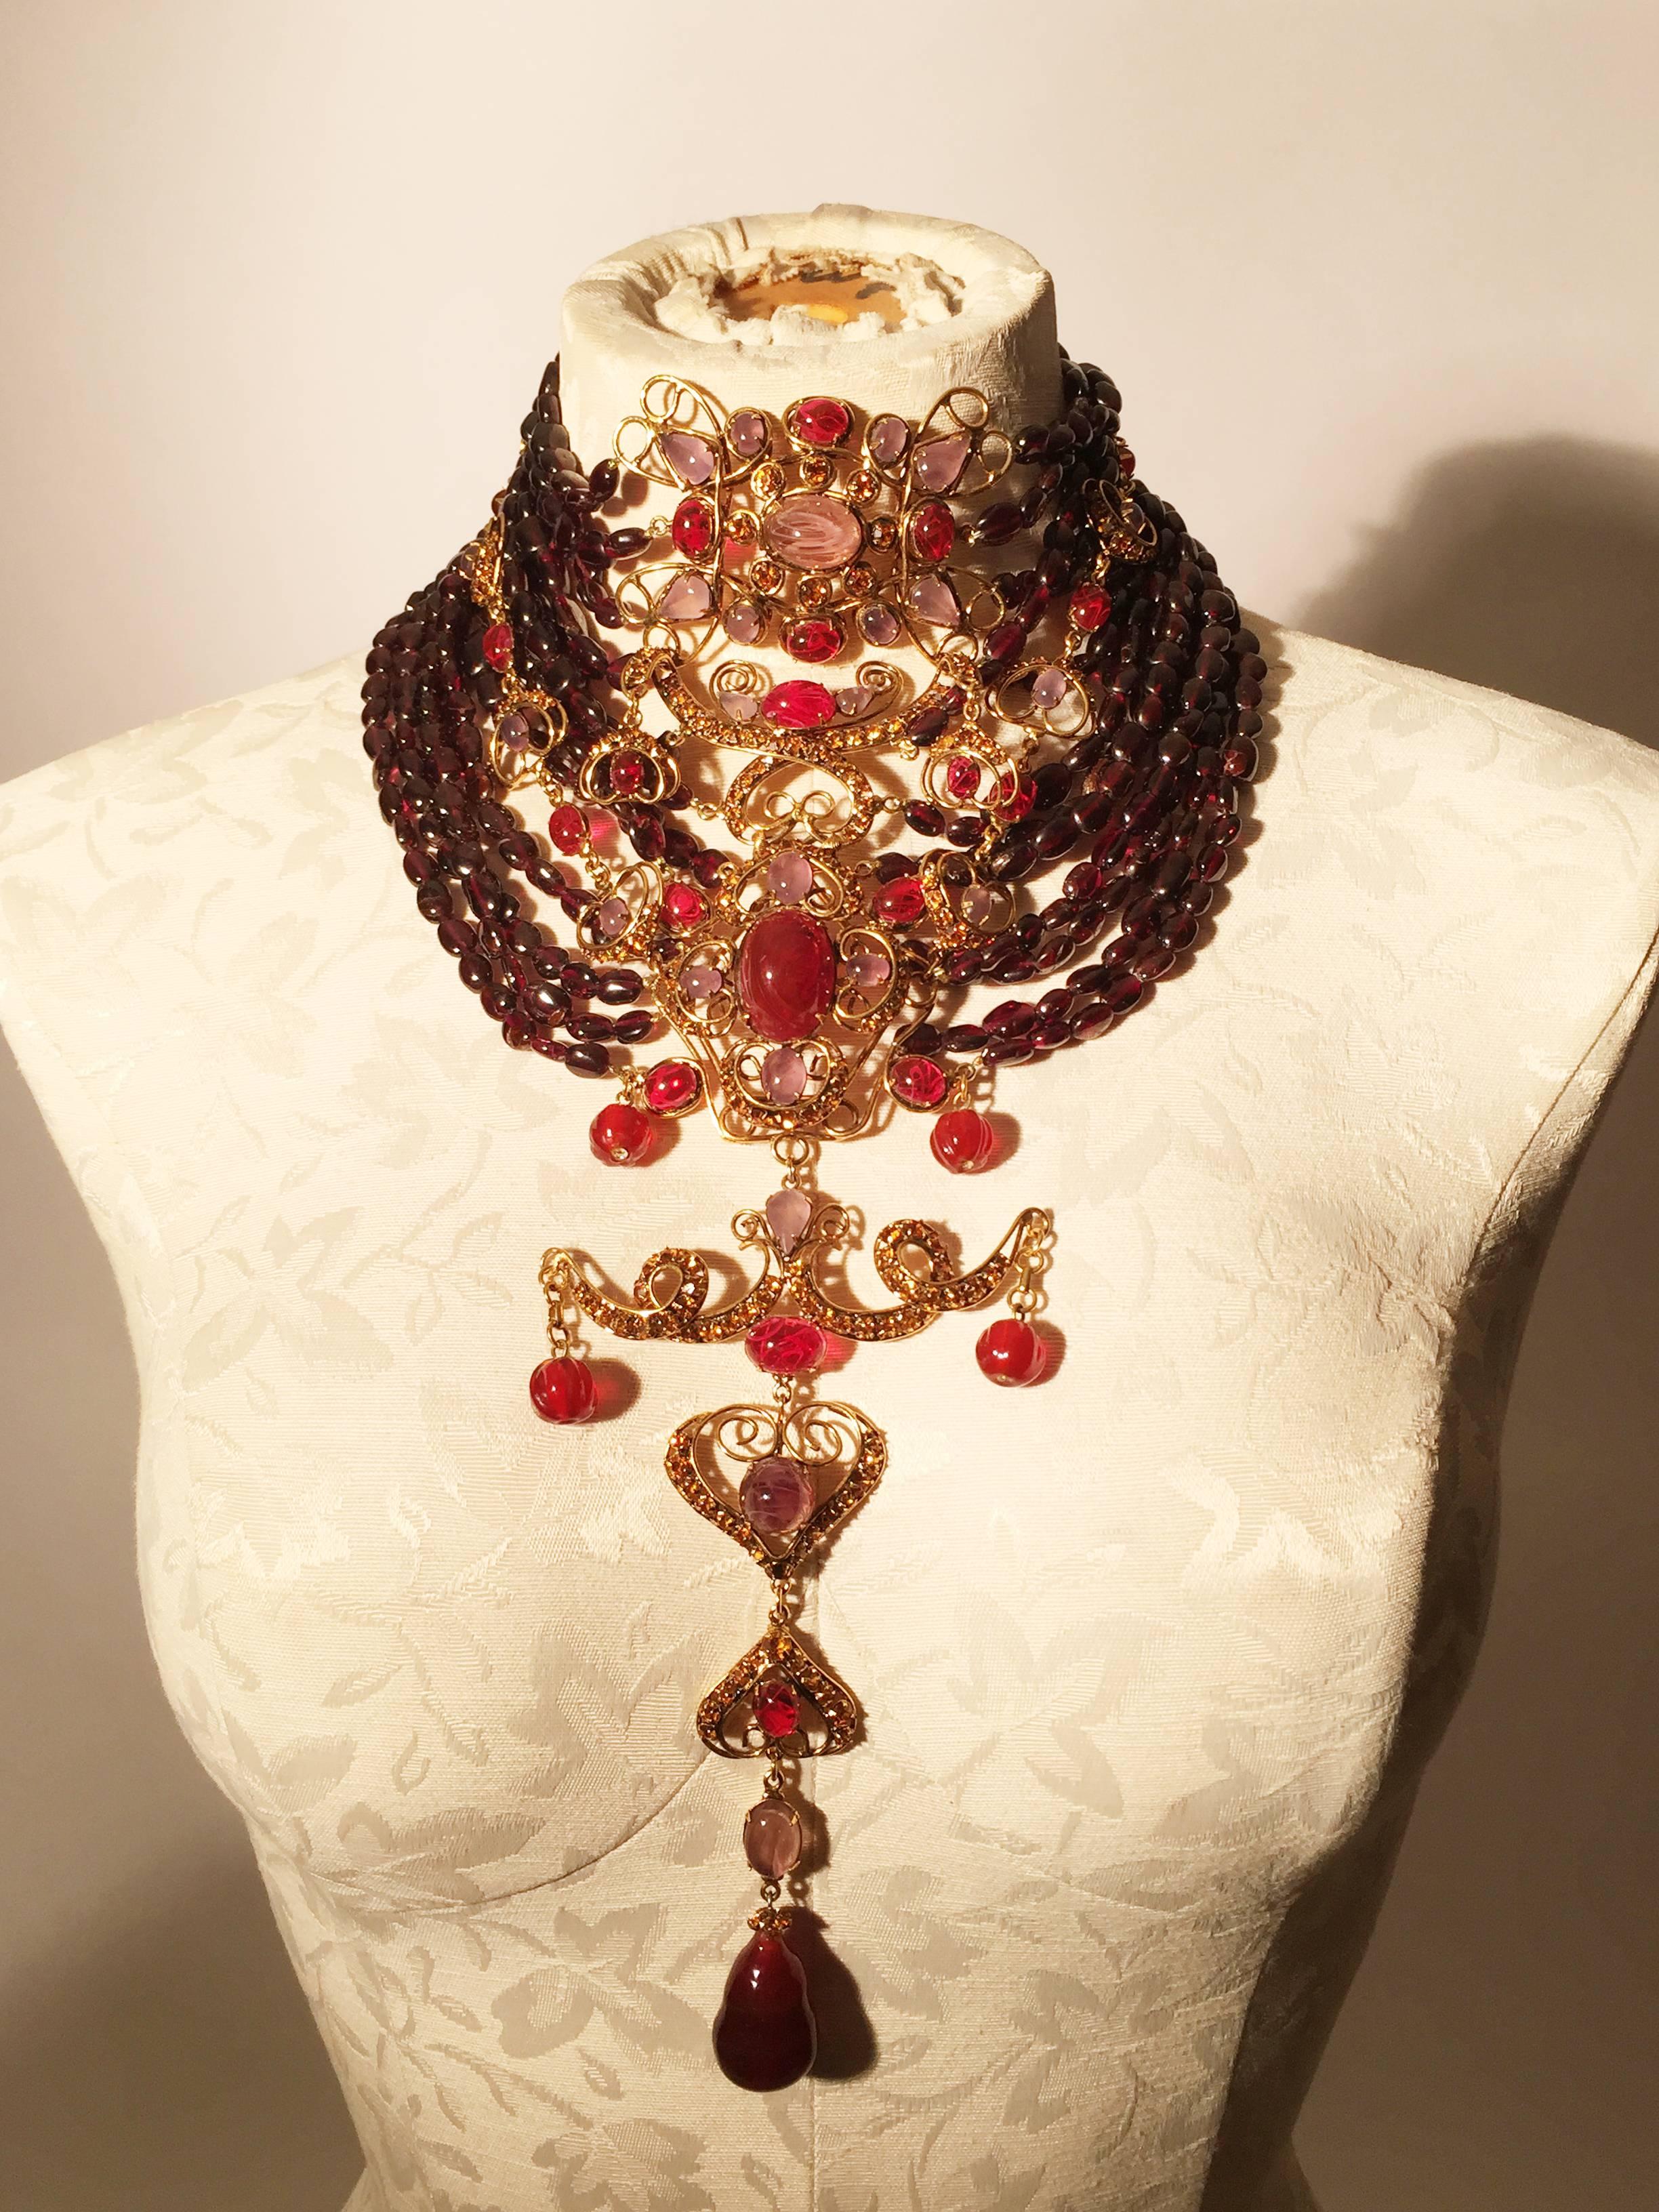 Iradj Moini statement necklace, this super glamorous necklace is not for the shy diva! Comprised of centre flawed glass cabochon medallions accented by Amber Swarorski crystals and suspended from 12 rows of garnets. Dangling Gripoix glass tear